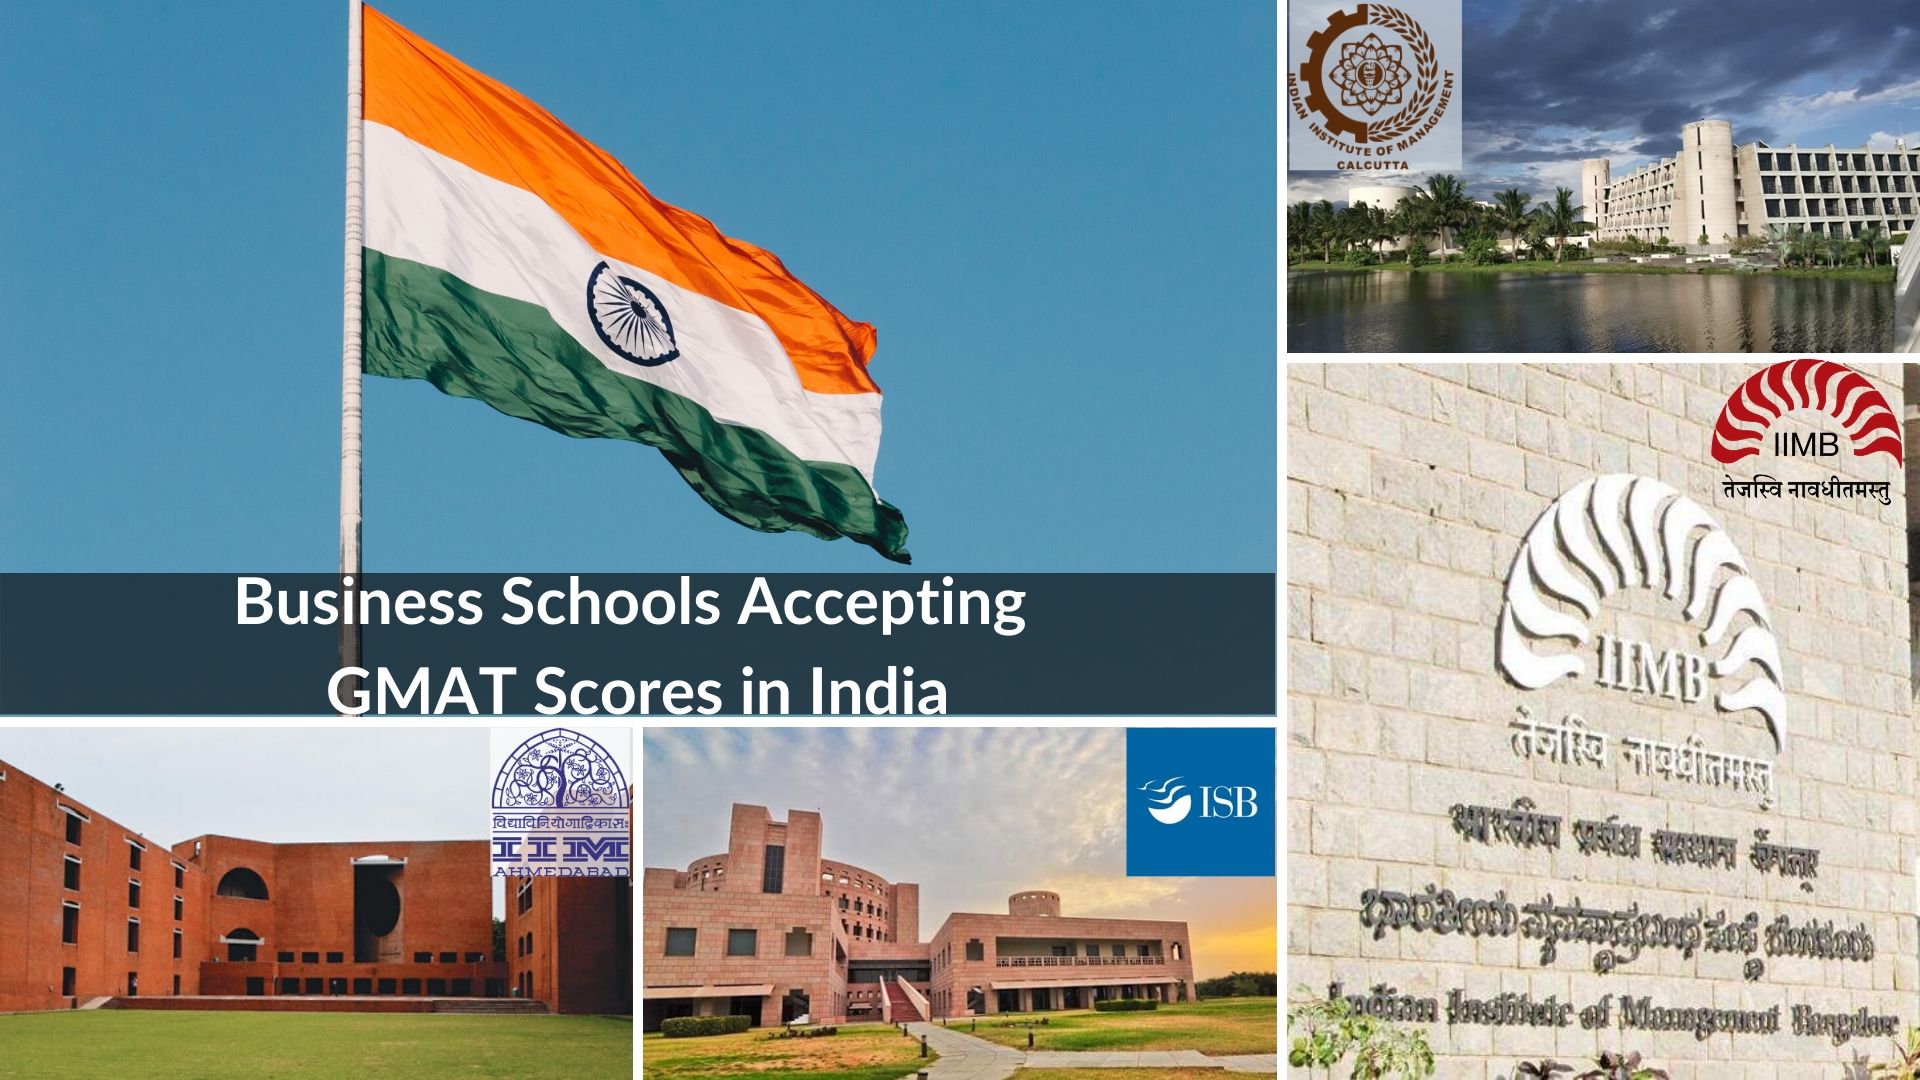 Which business schools accept GMAT scores in India?